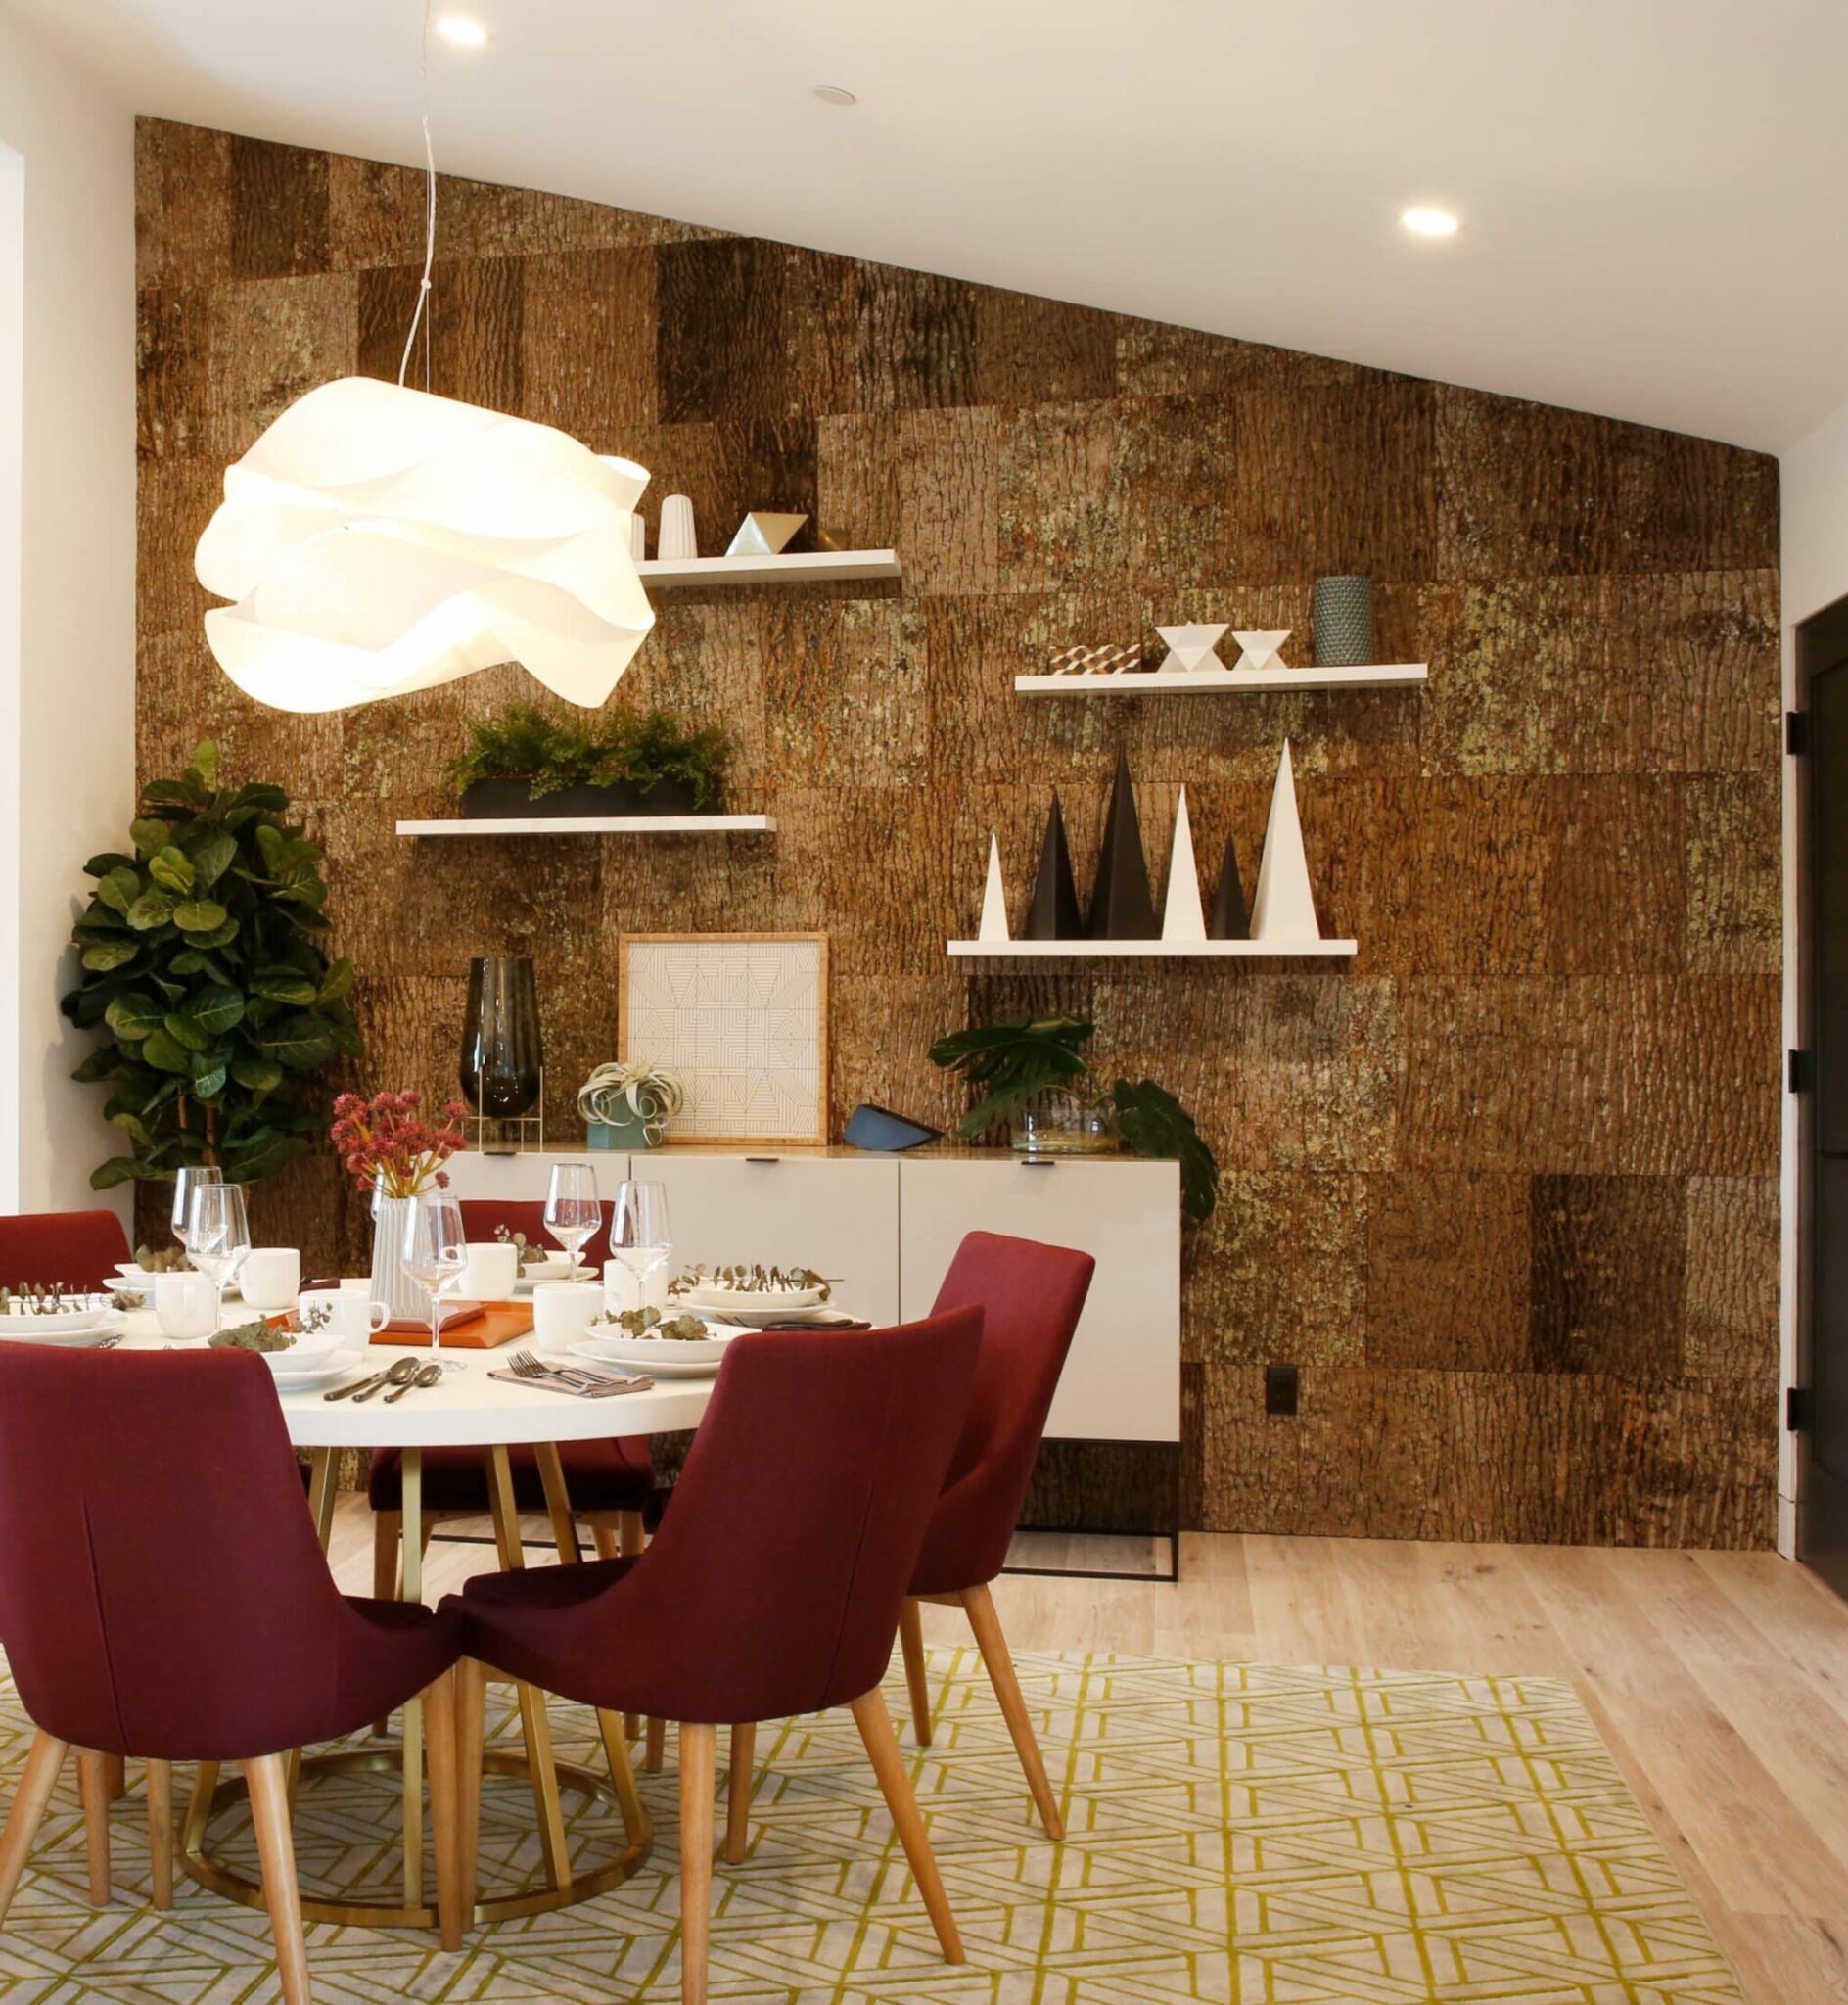 How Cork Wall Tiles and Panels Bring Value to Interior Design